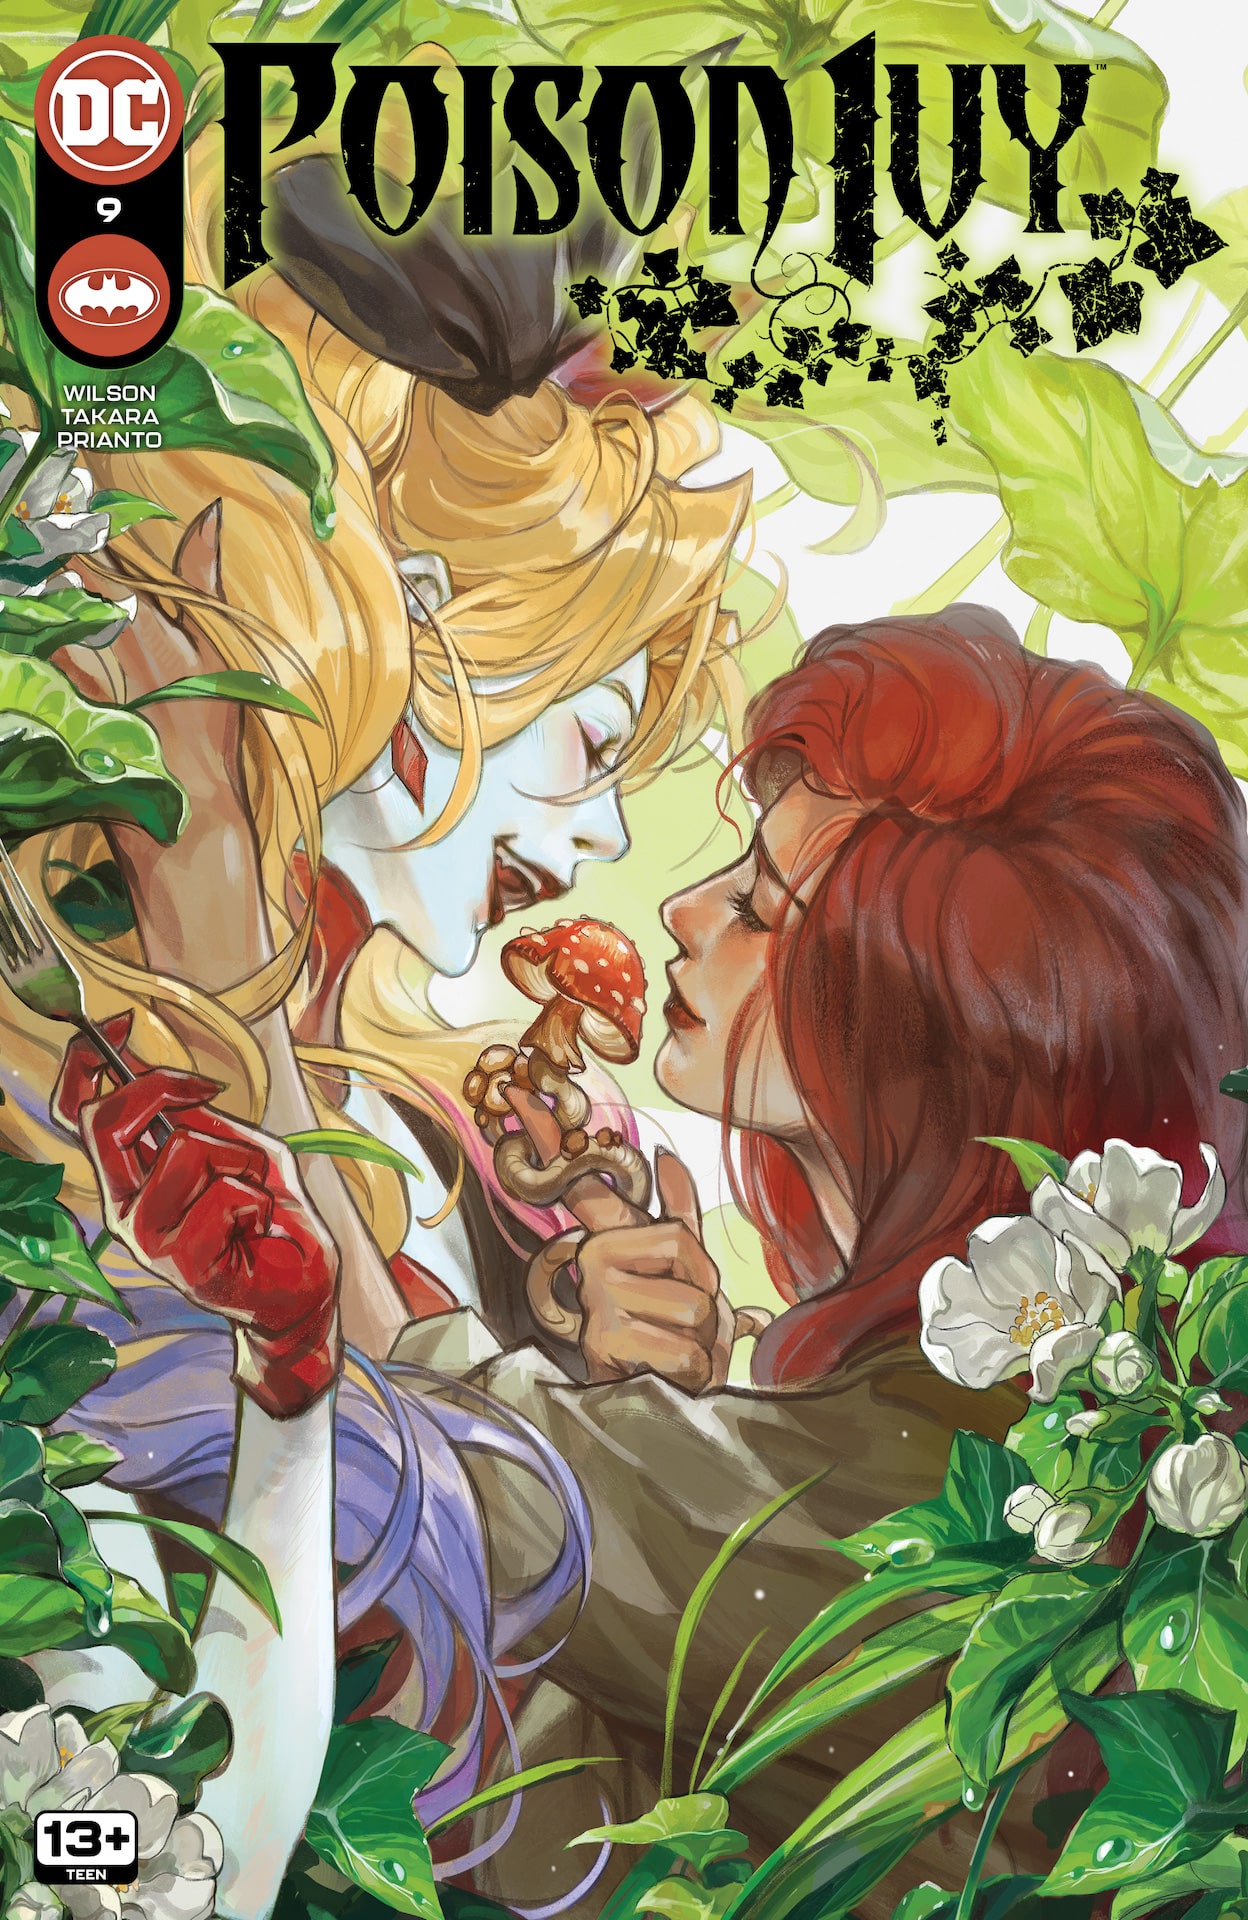 DC Preview: Poison Ivy #9